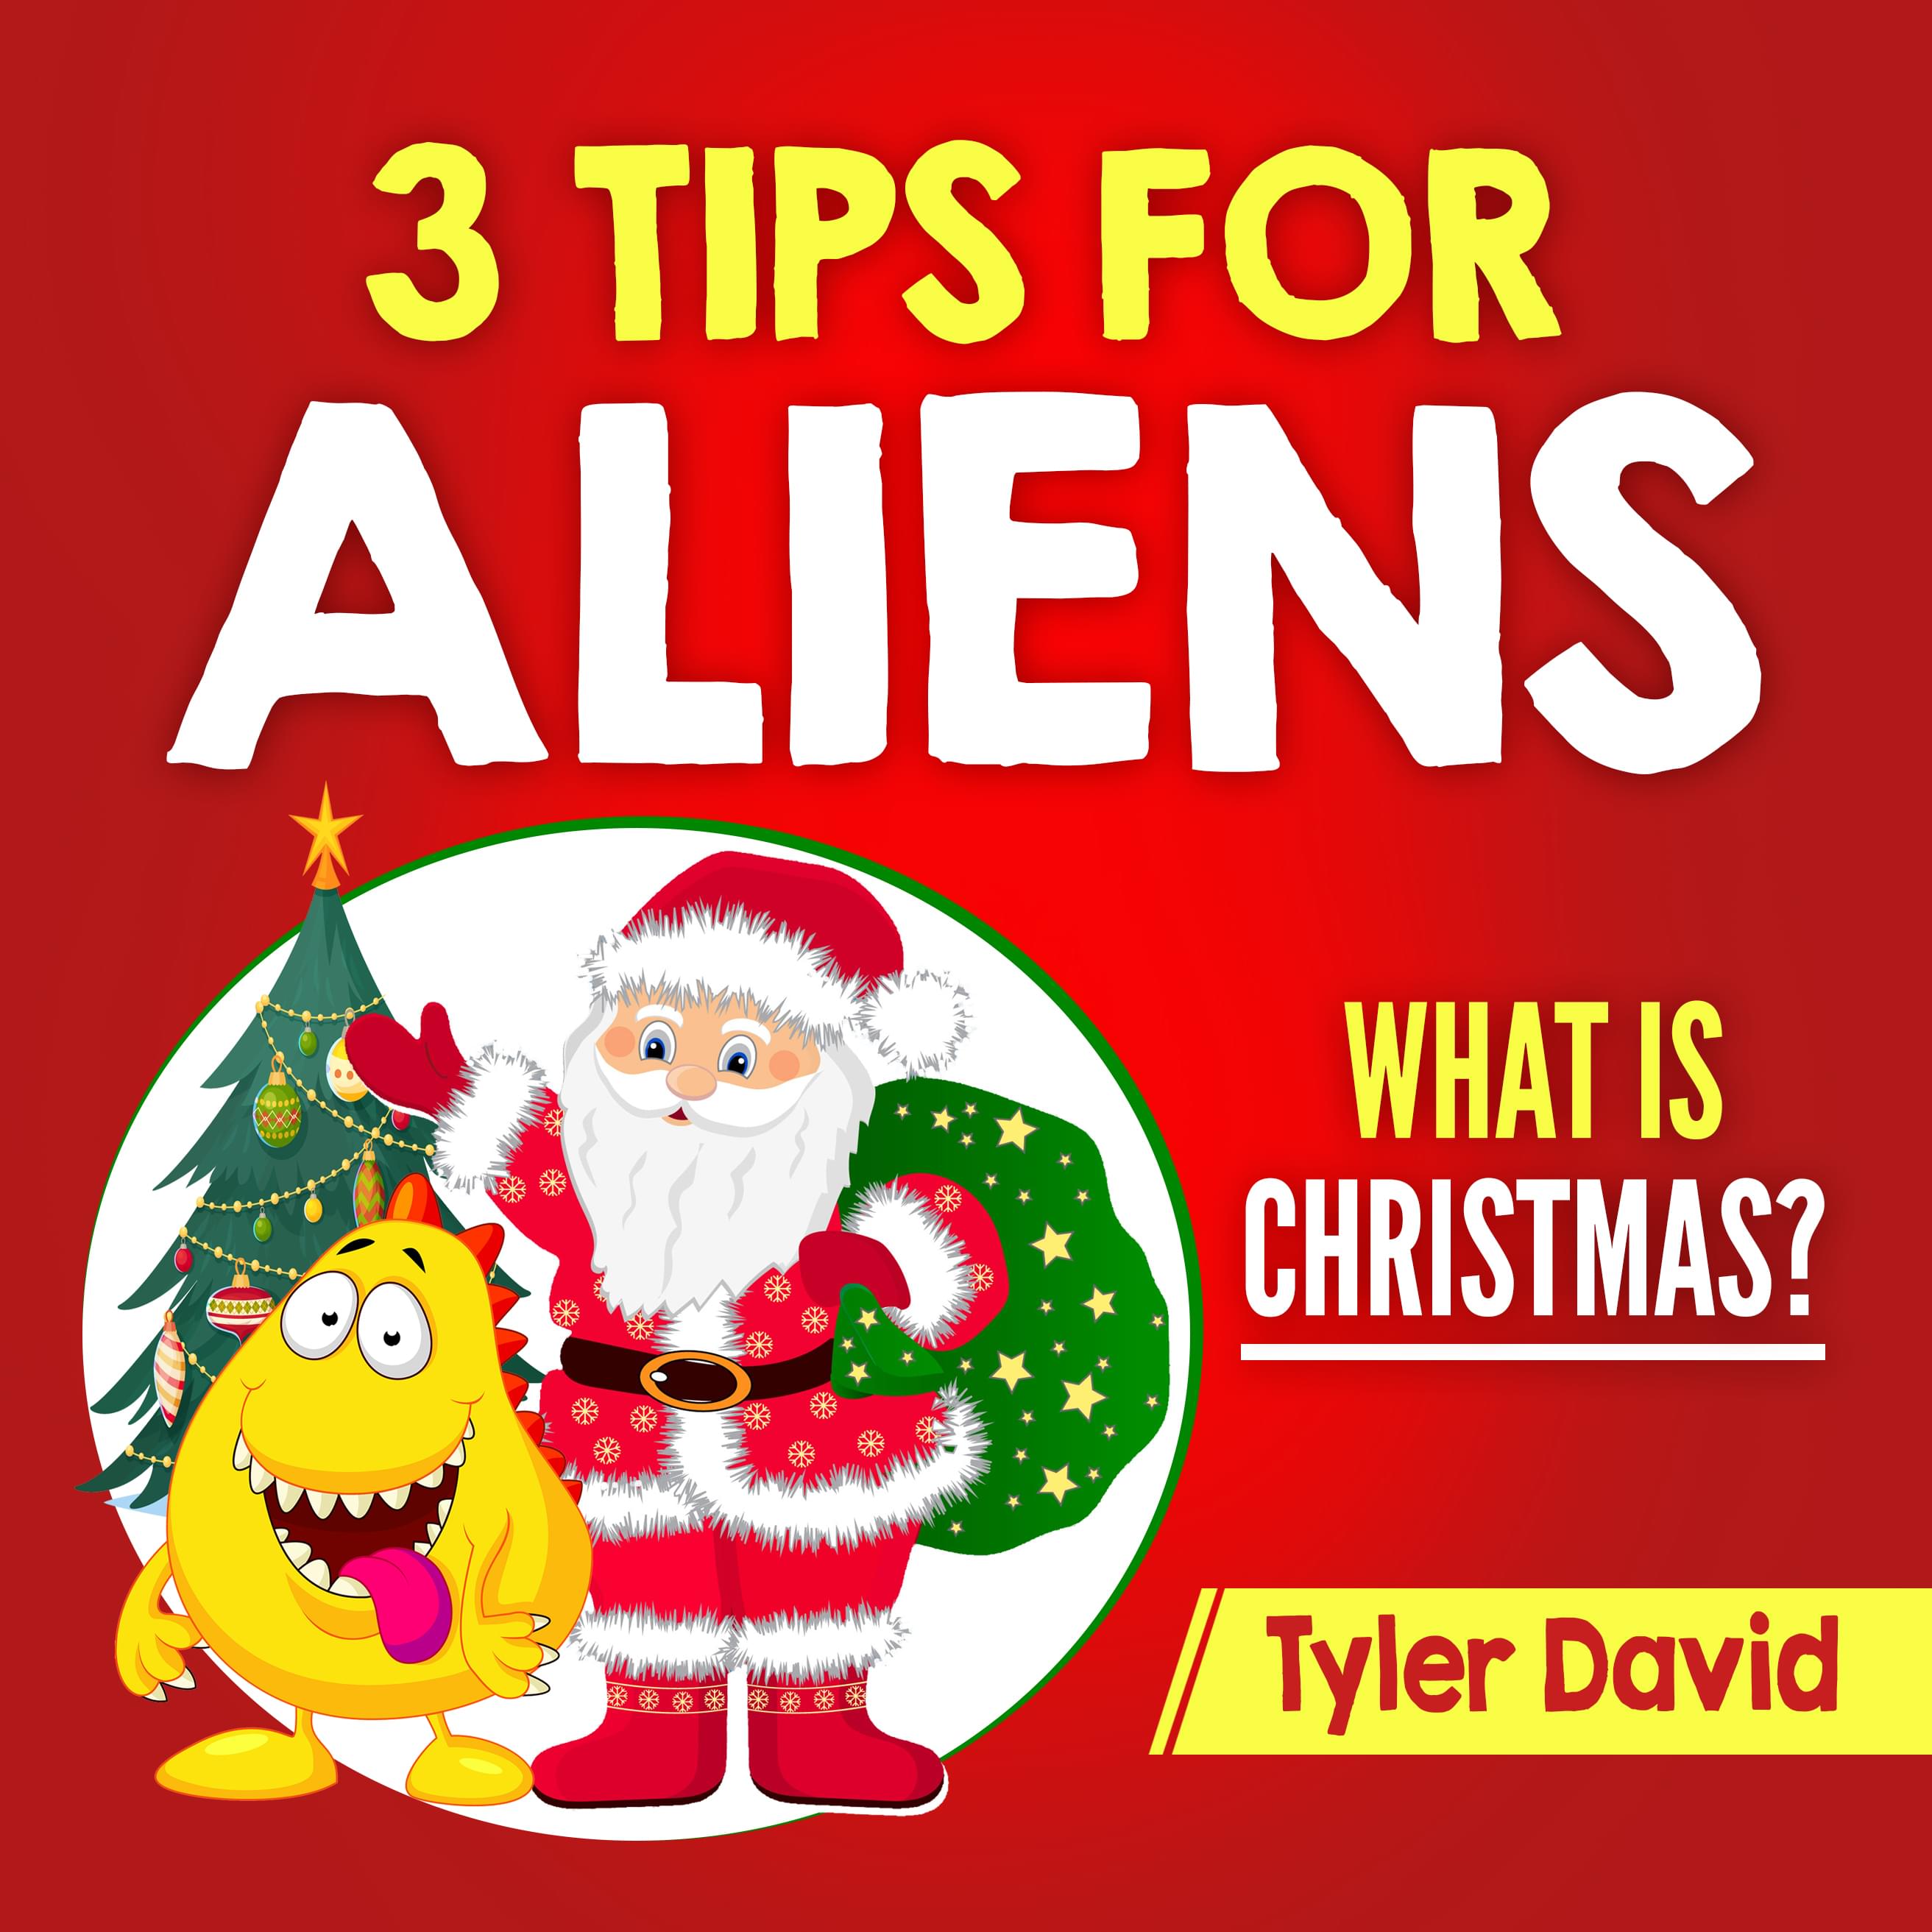 3 Tips for Aliens - What is Christmas